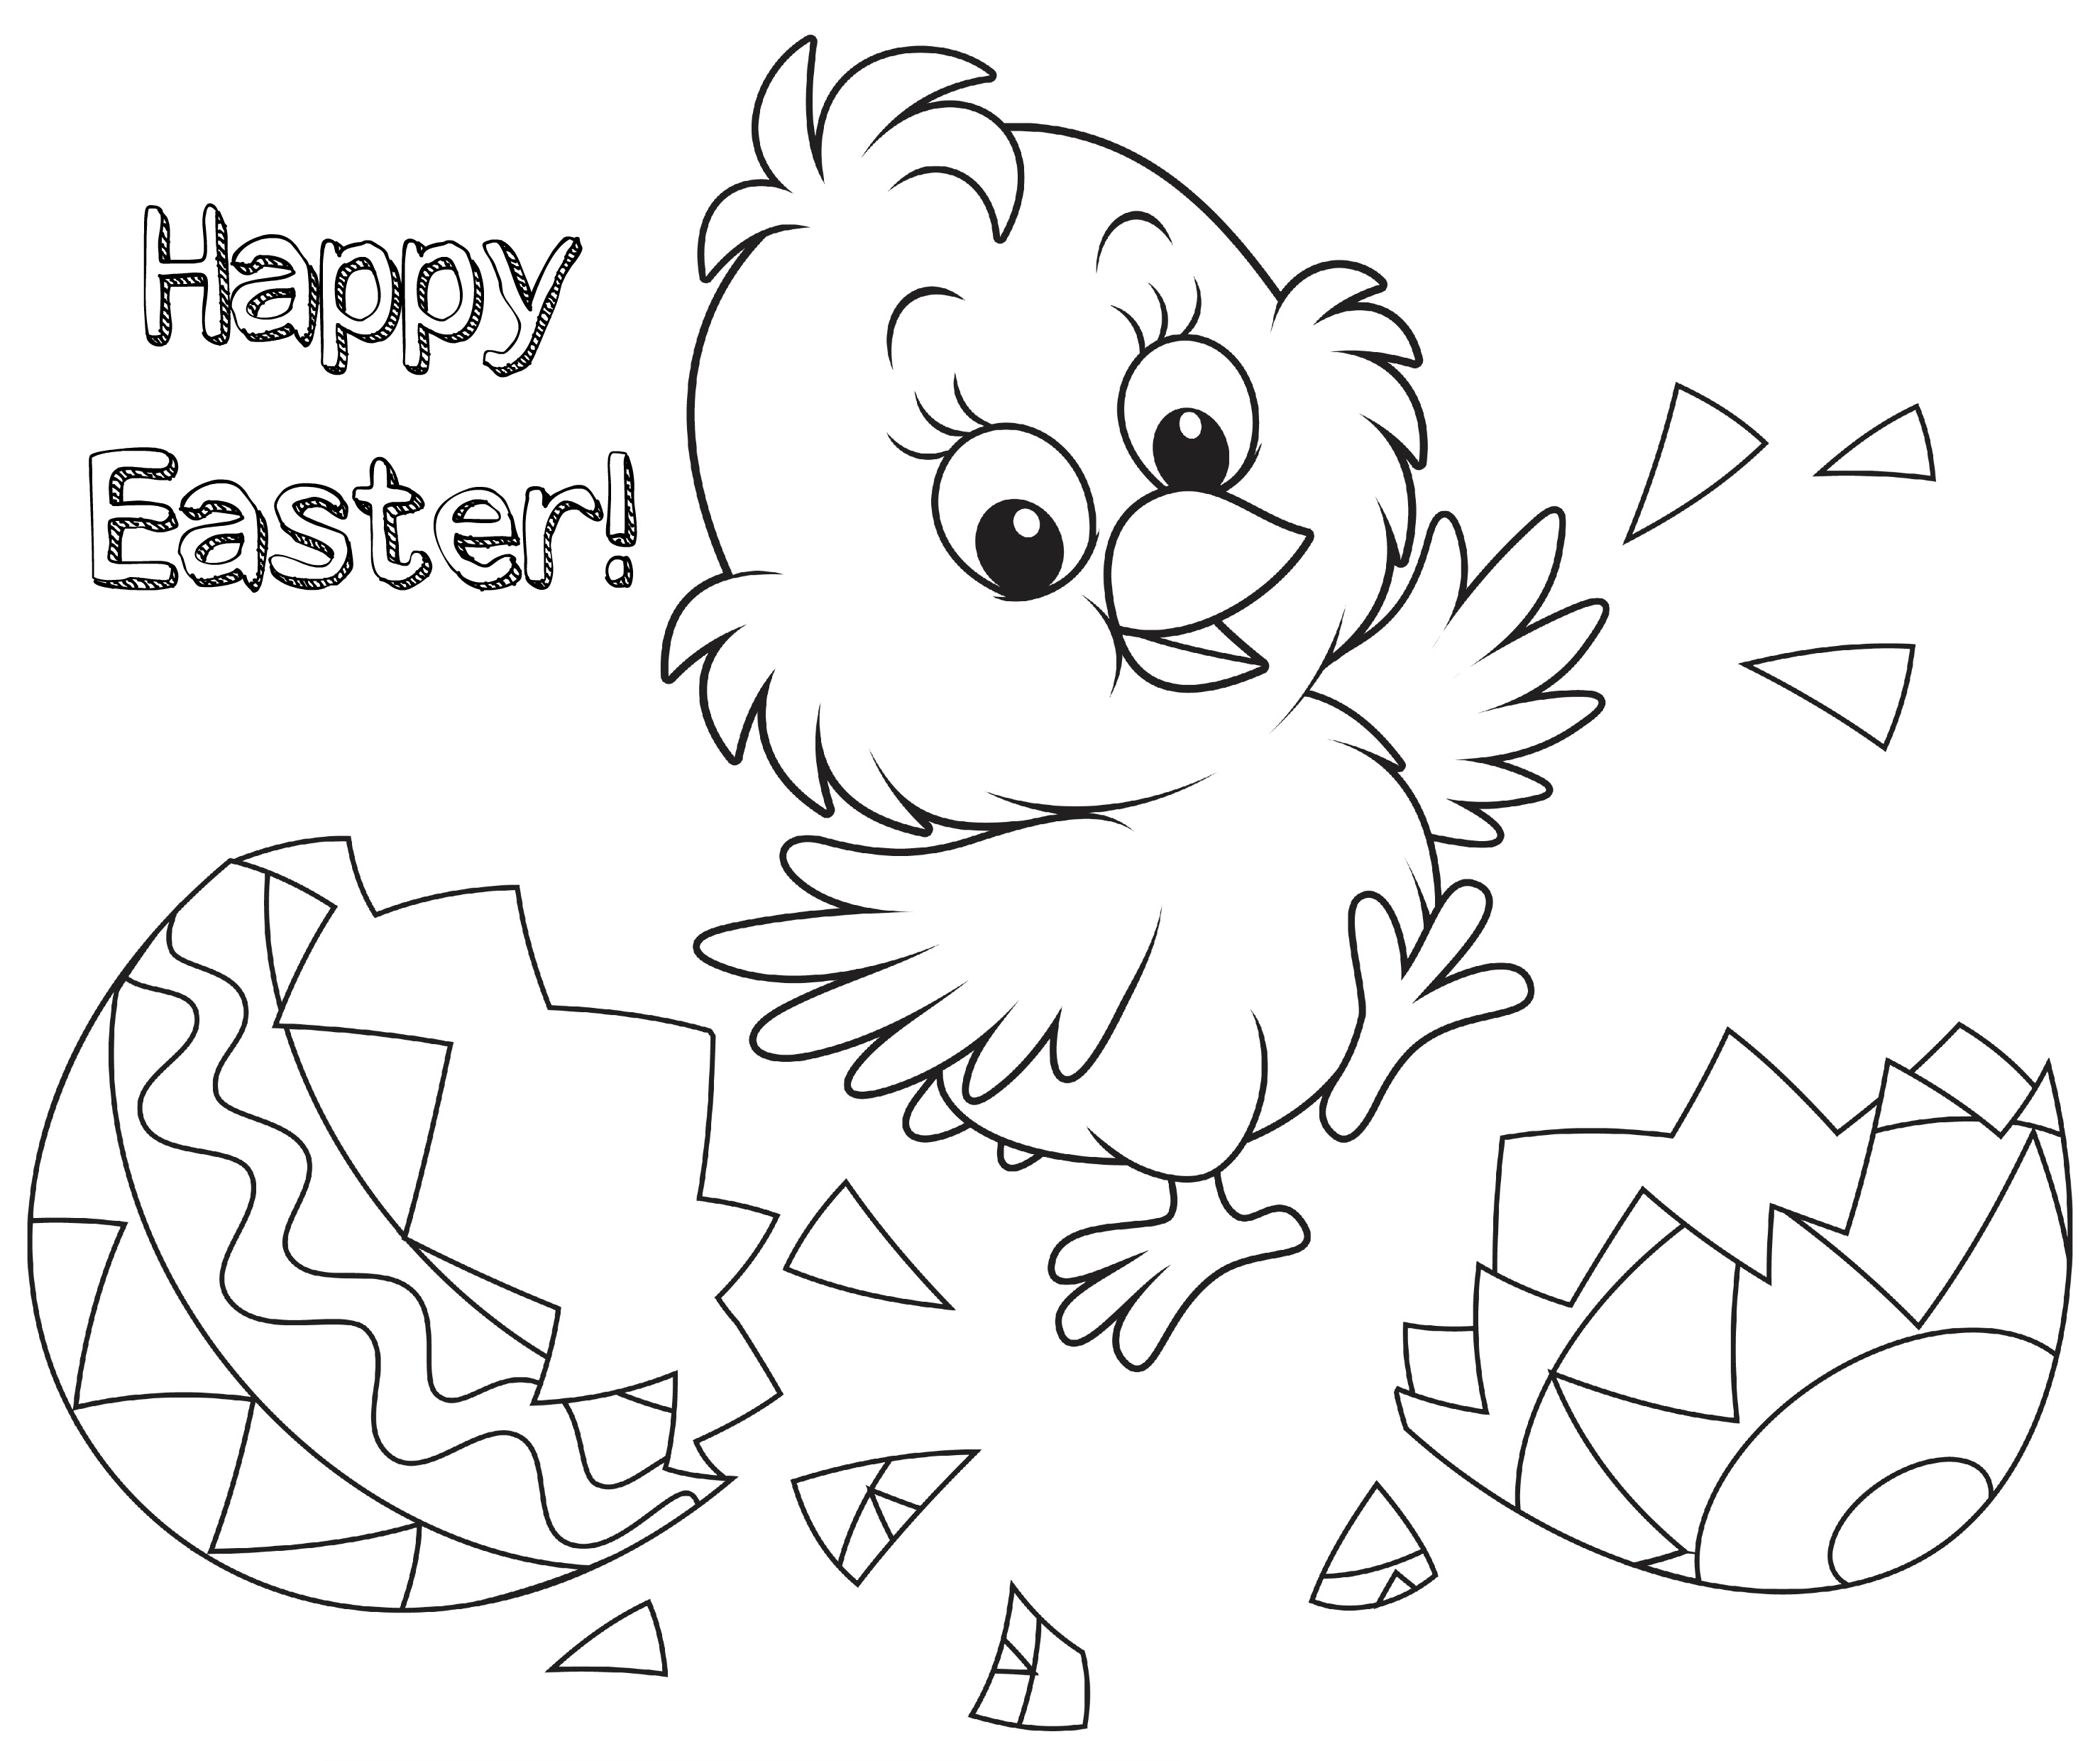 Happy Easter Chick Egg Coloring Page